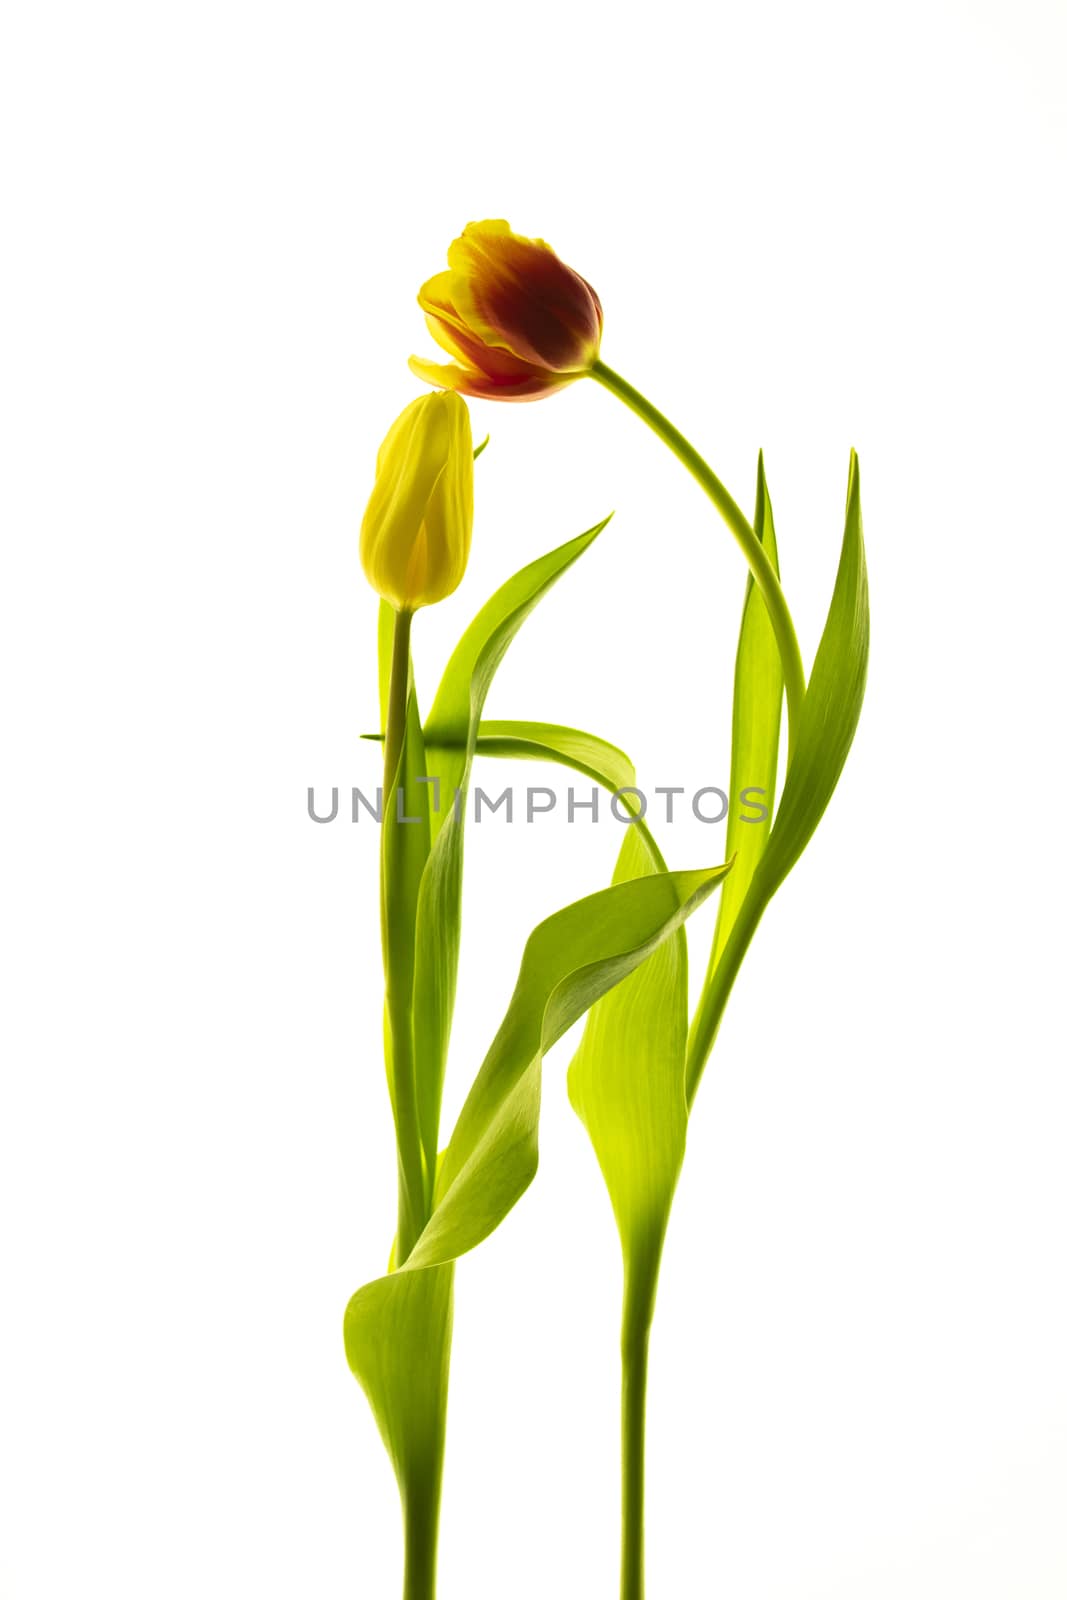 Tulips flower collection isolated on white background by sashokddt